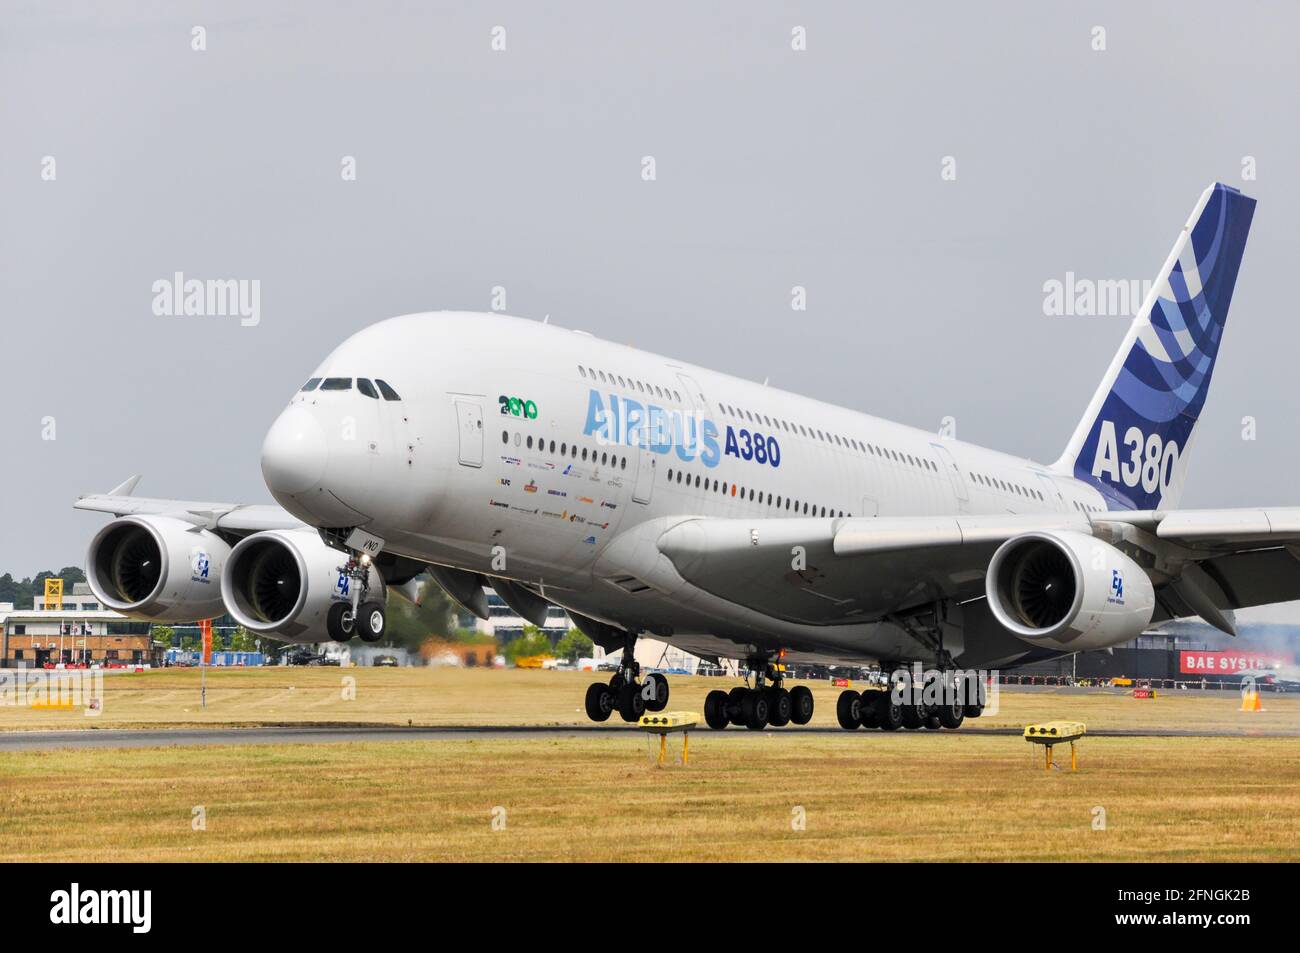 Airbus A380 corporate schemed jet airliner plane prototype F-WWDD landing after display flight at Farnborough International Airshow 2010, UK Stock Photo